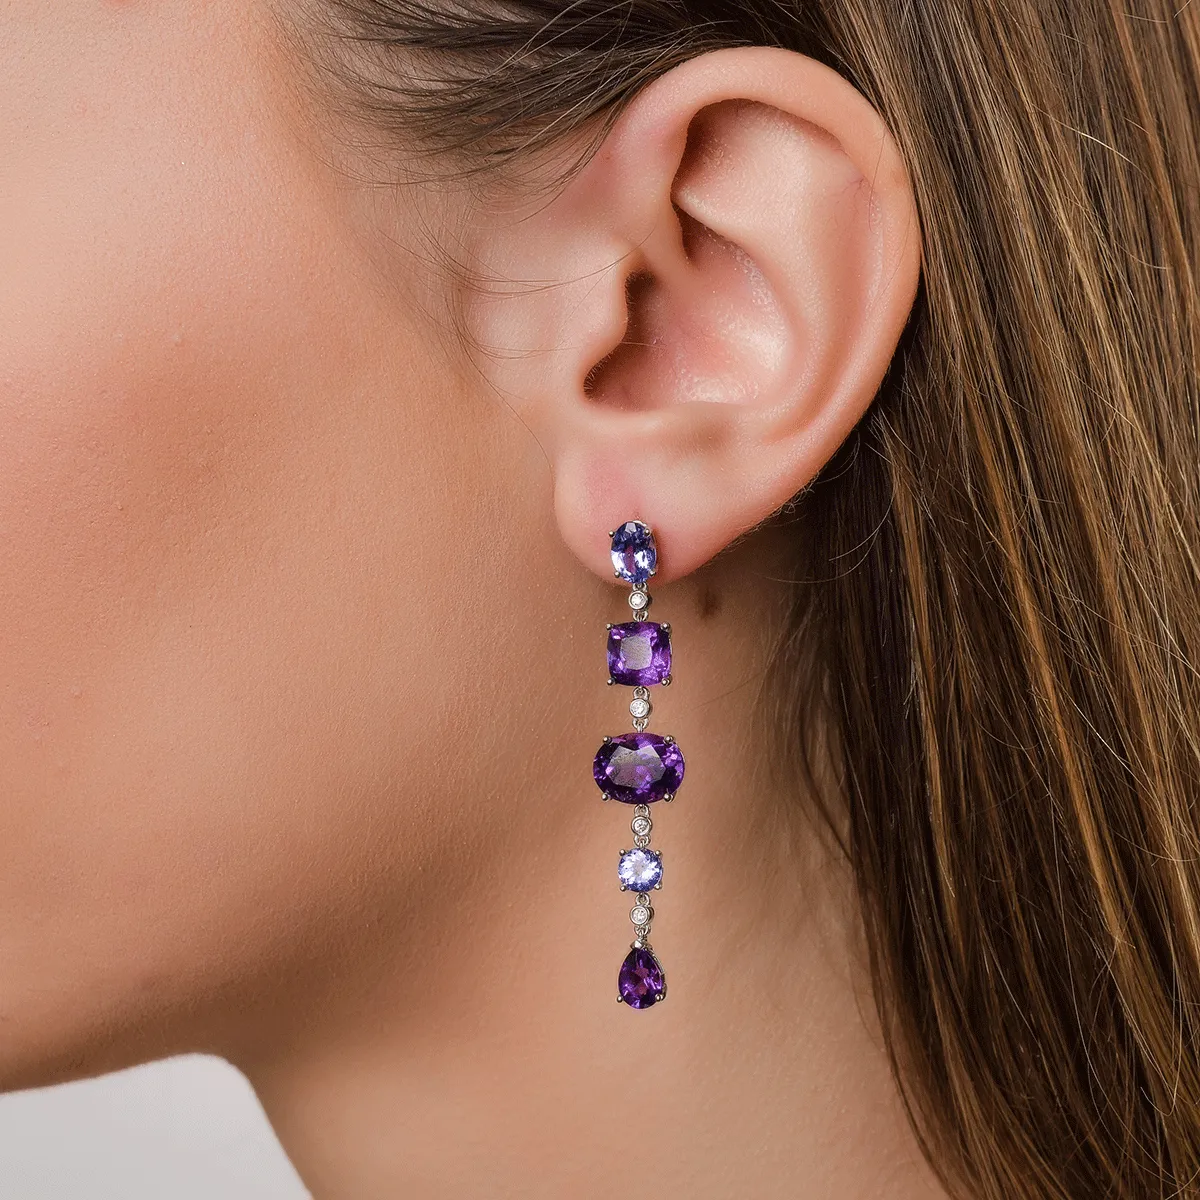 18K white gold earrings with 8.2ct amethysts and 1.7ct tanzanite